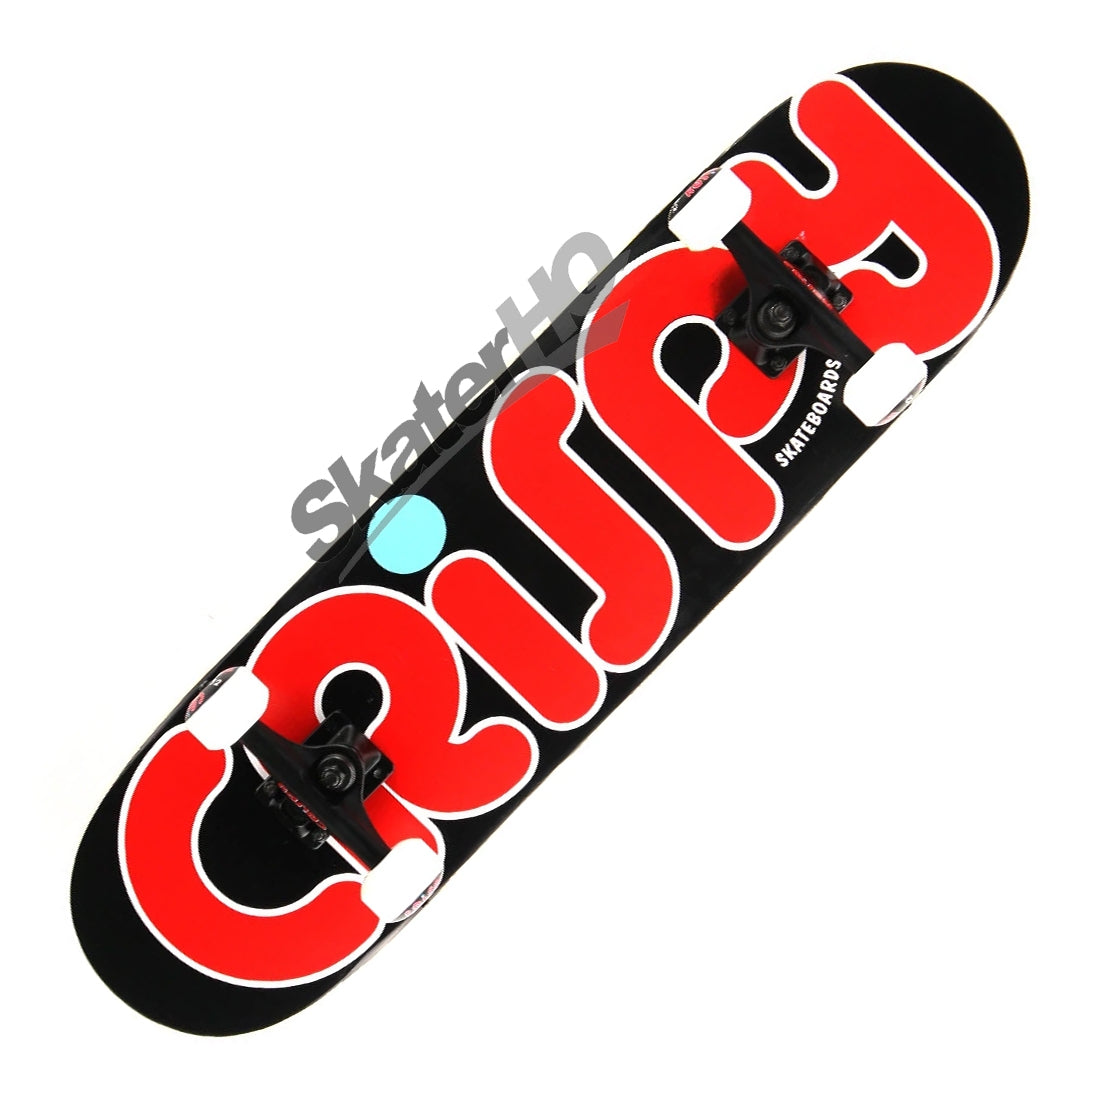 Crispy Rookie 7.75 Complete - Red/Black Skateboard Compl Cruisers